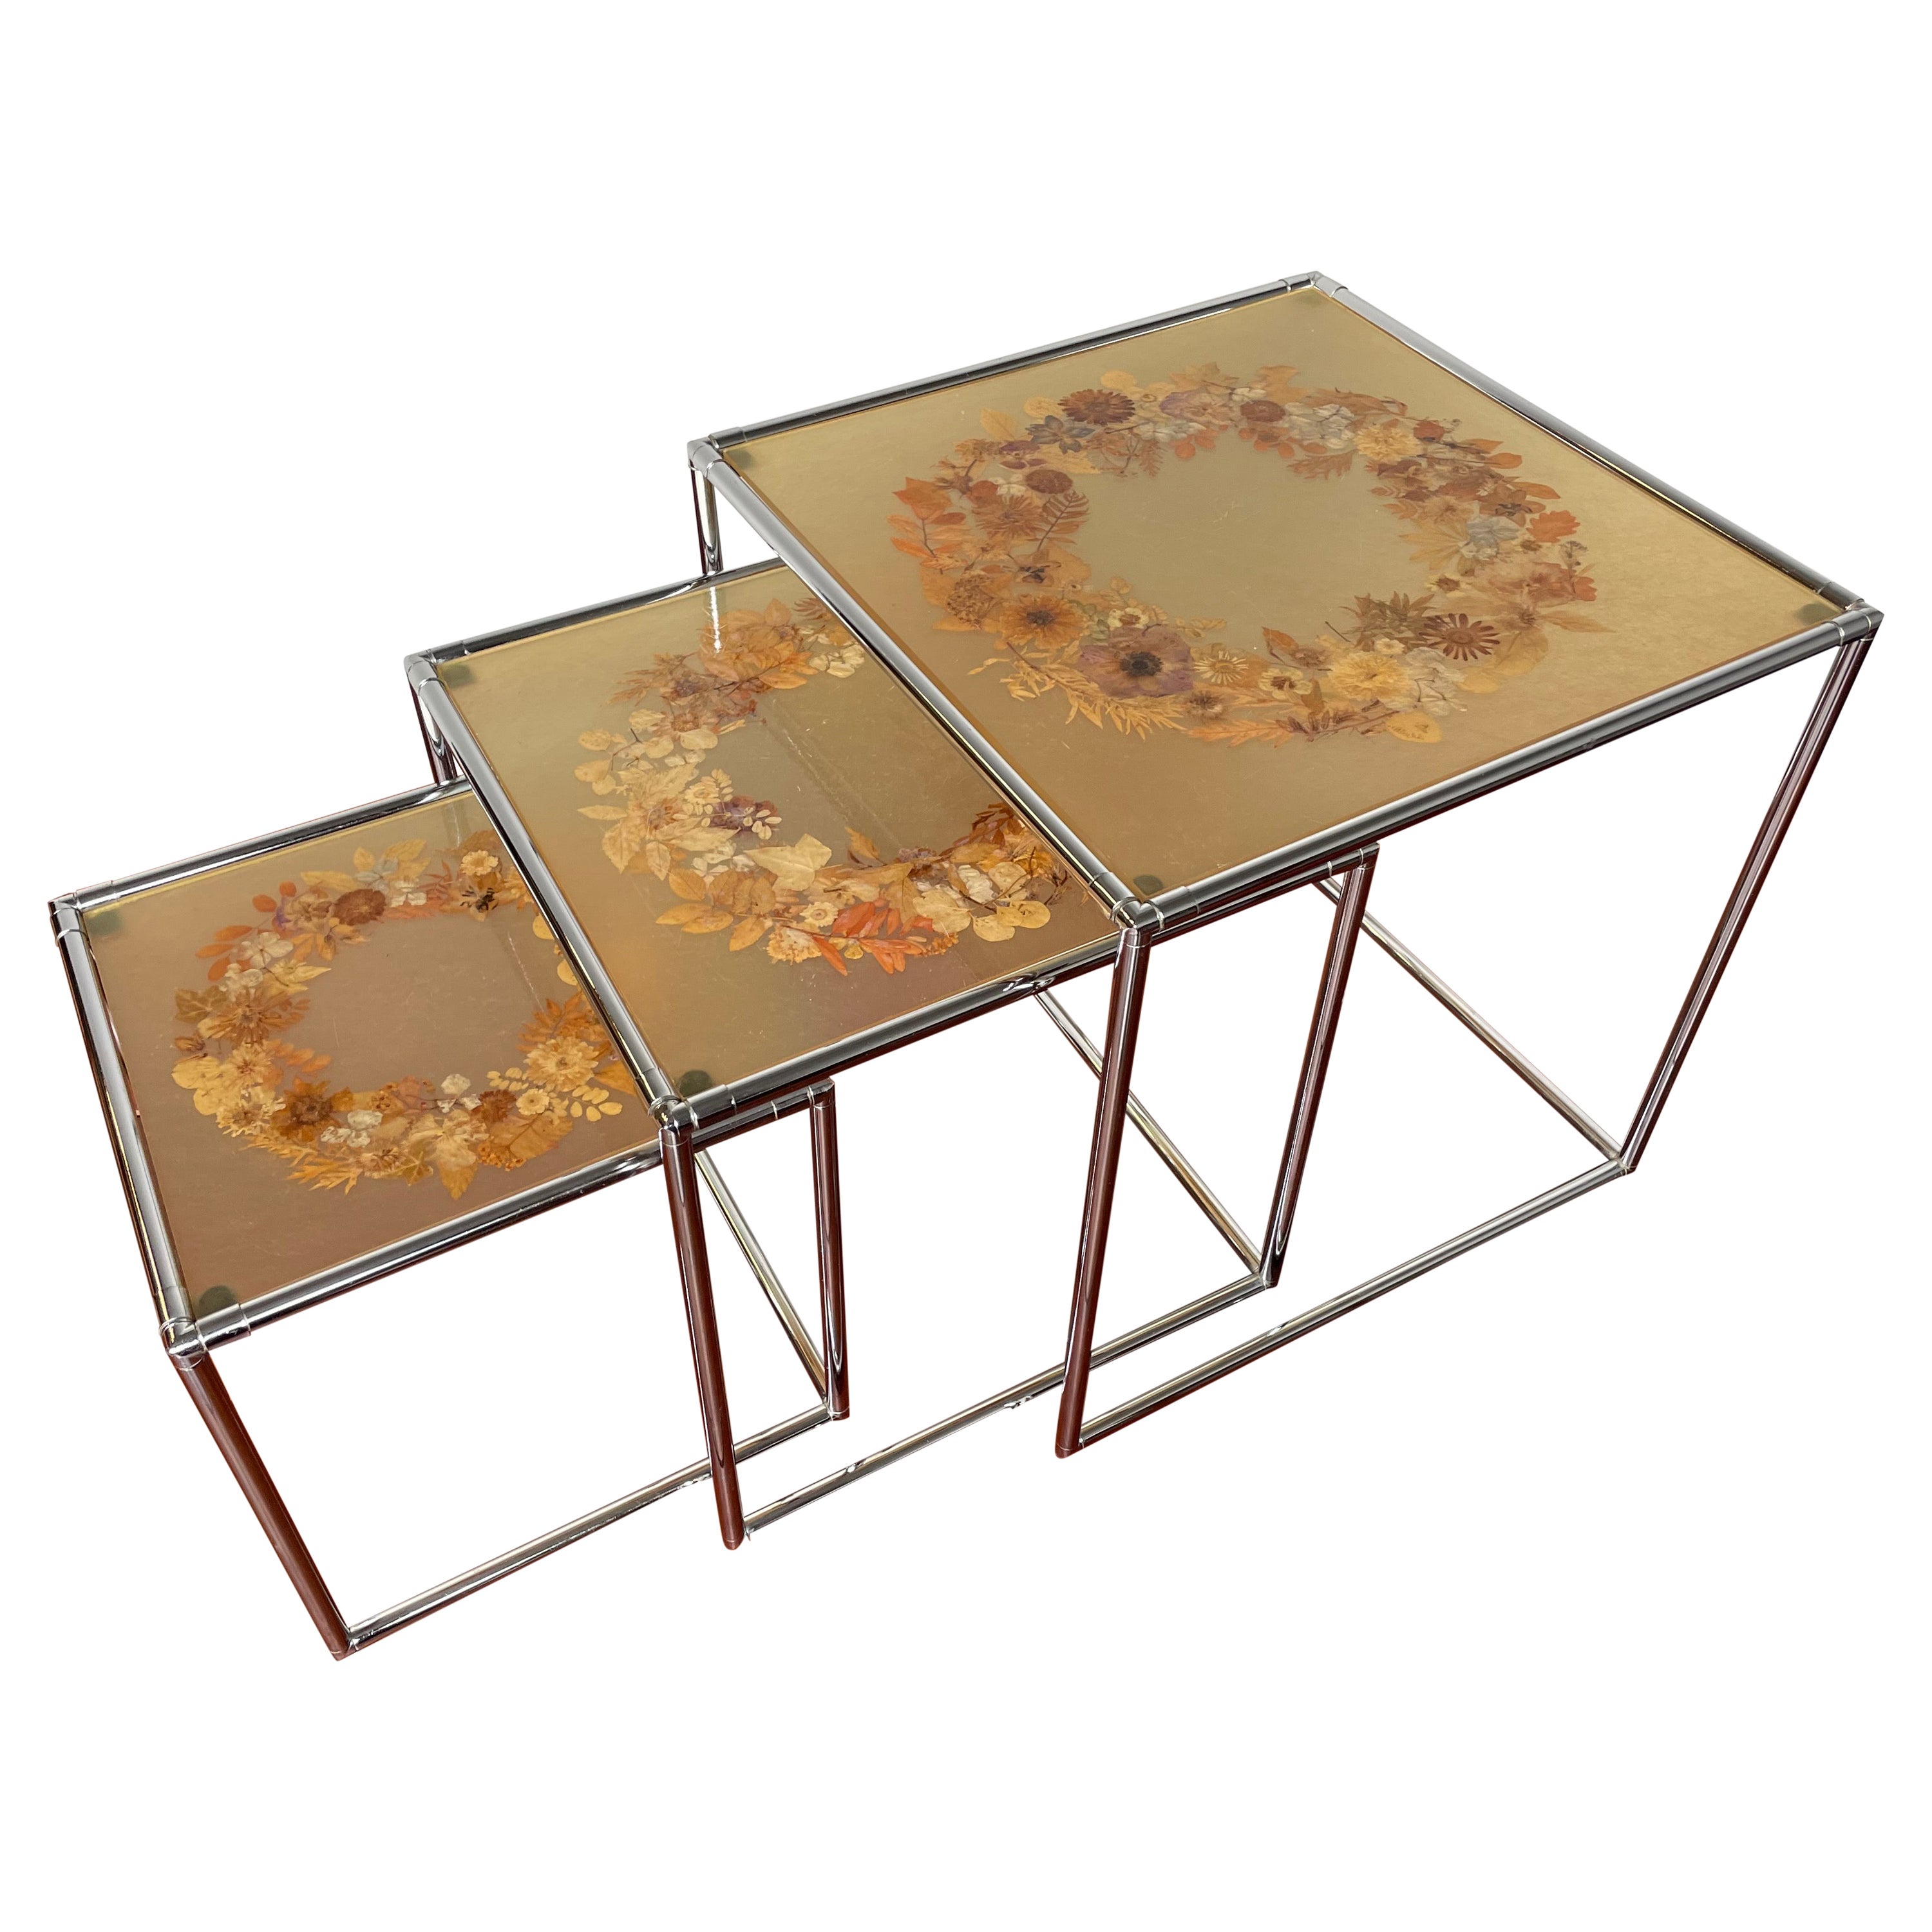 Rare Mid-Century Modern, French Set of Chrome & Resin Inlaid Tables by Accolay For Sale